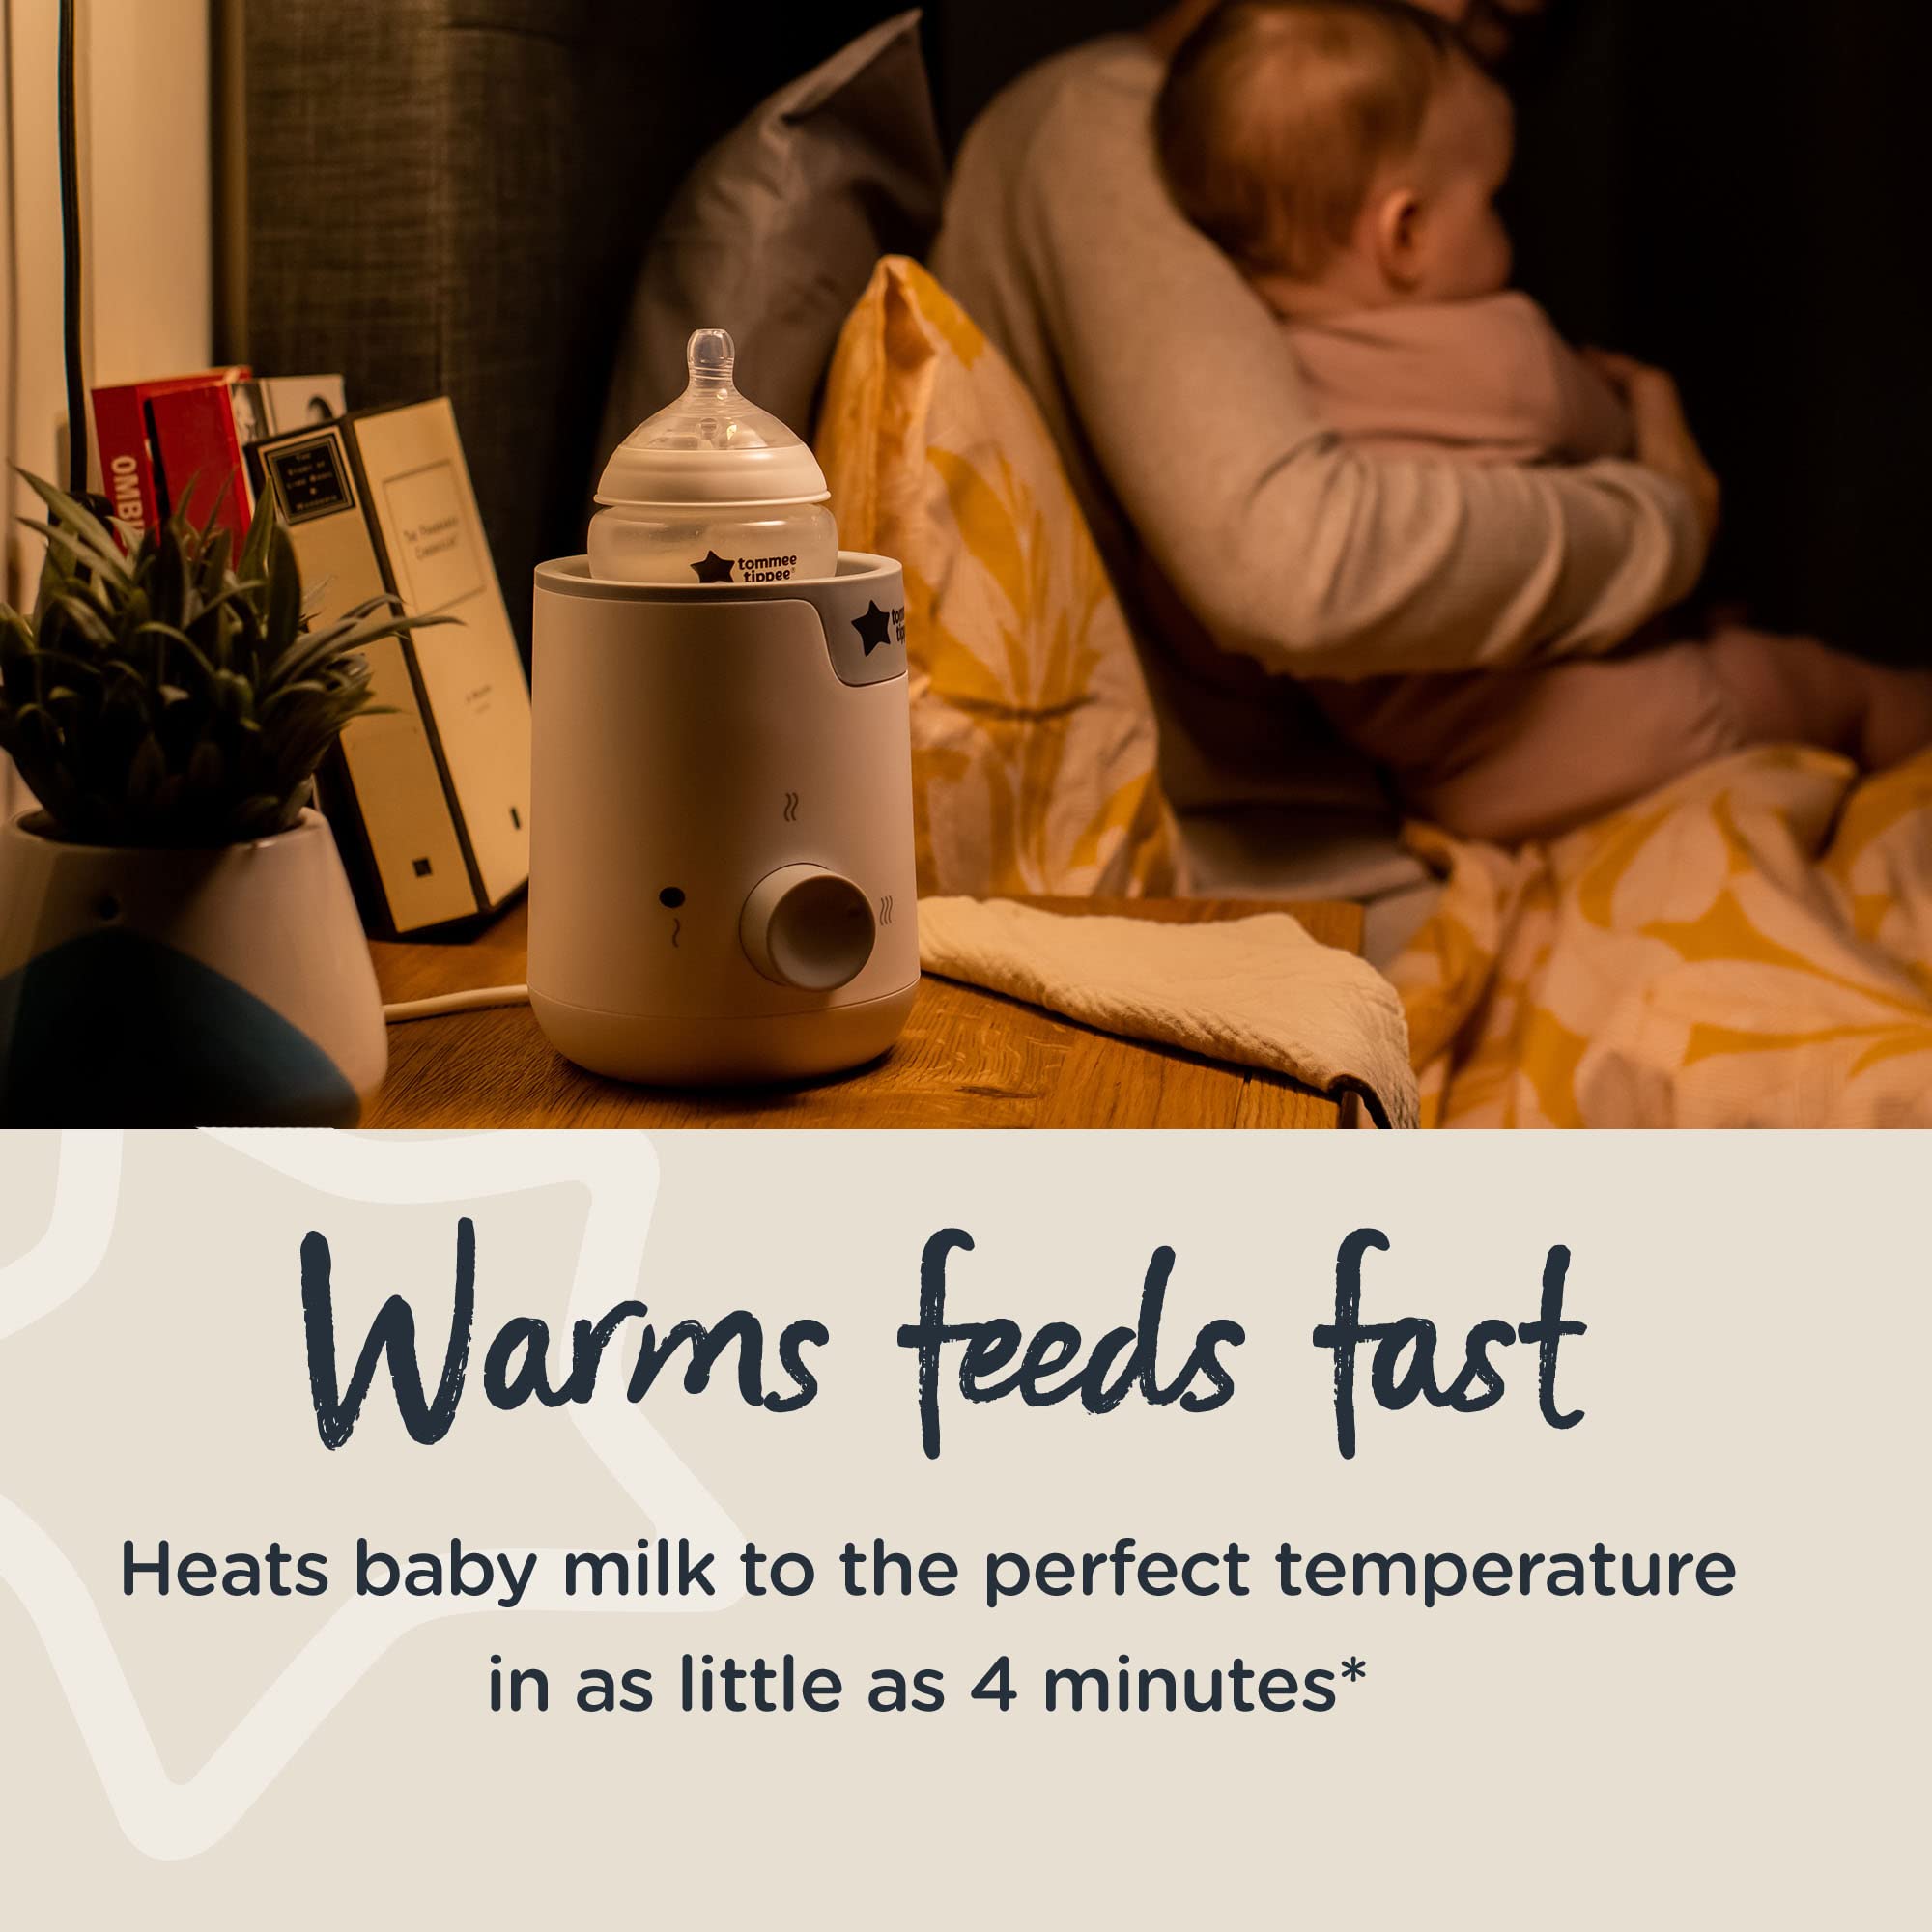 Tommee Tippee Easiwarm Bottle Warmer, Warms Baby Feeds to Body Temperature in Minutes, Automatic Timer, One-Dial Operation, White